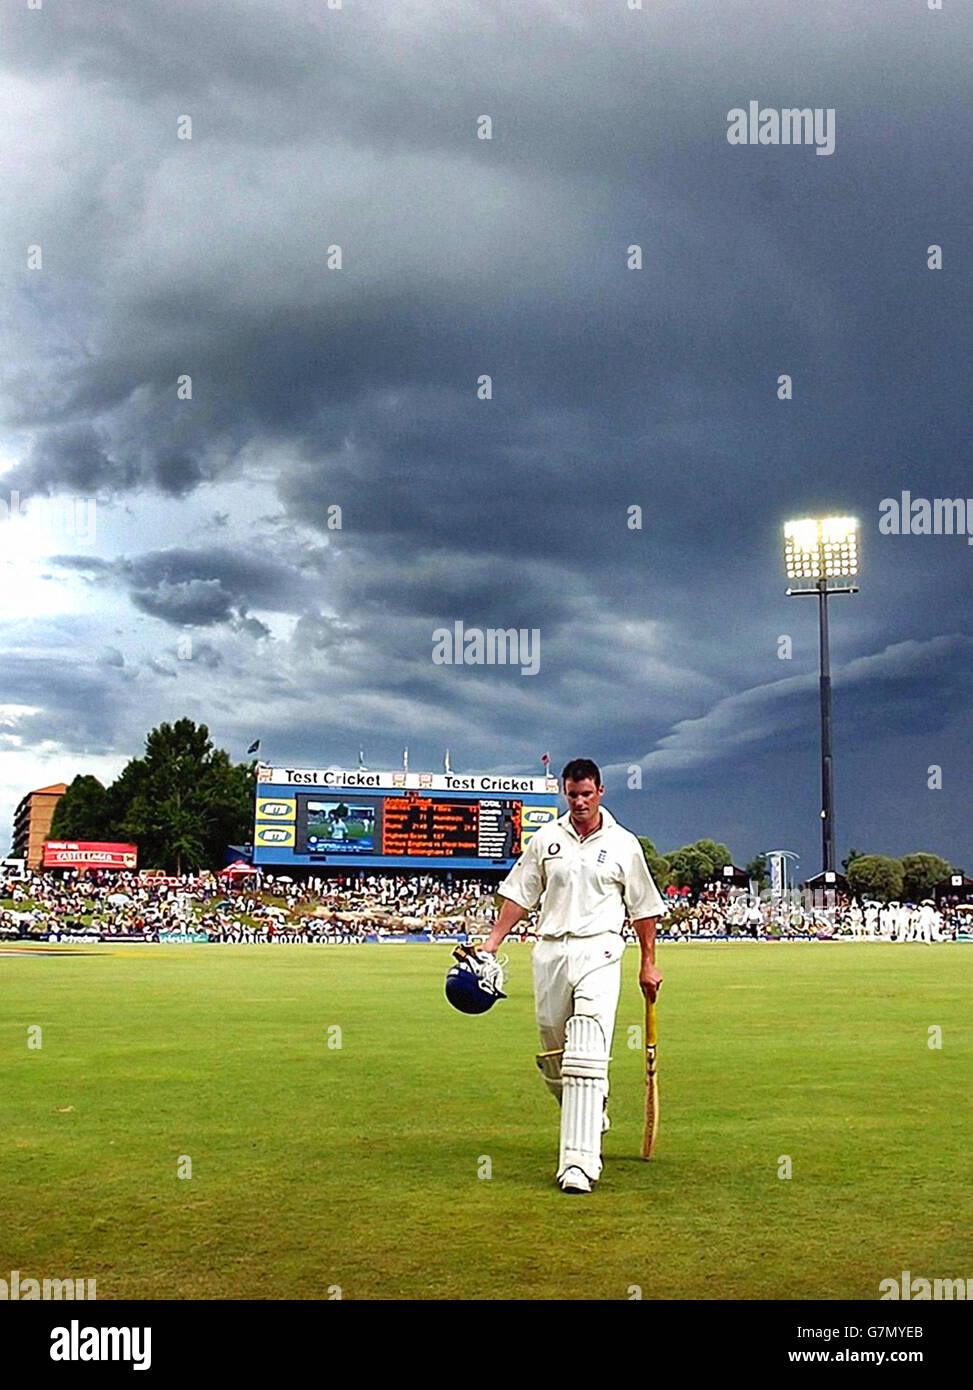 England's Andrew Strauss leaves the field after being caught by South Africa's Mark Boucher off the bowling of Andre Nel for 44 runs. Stock Photo